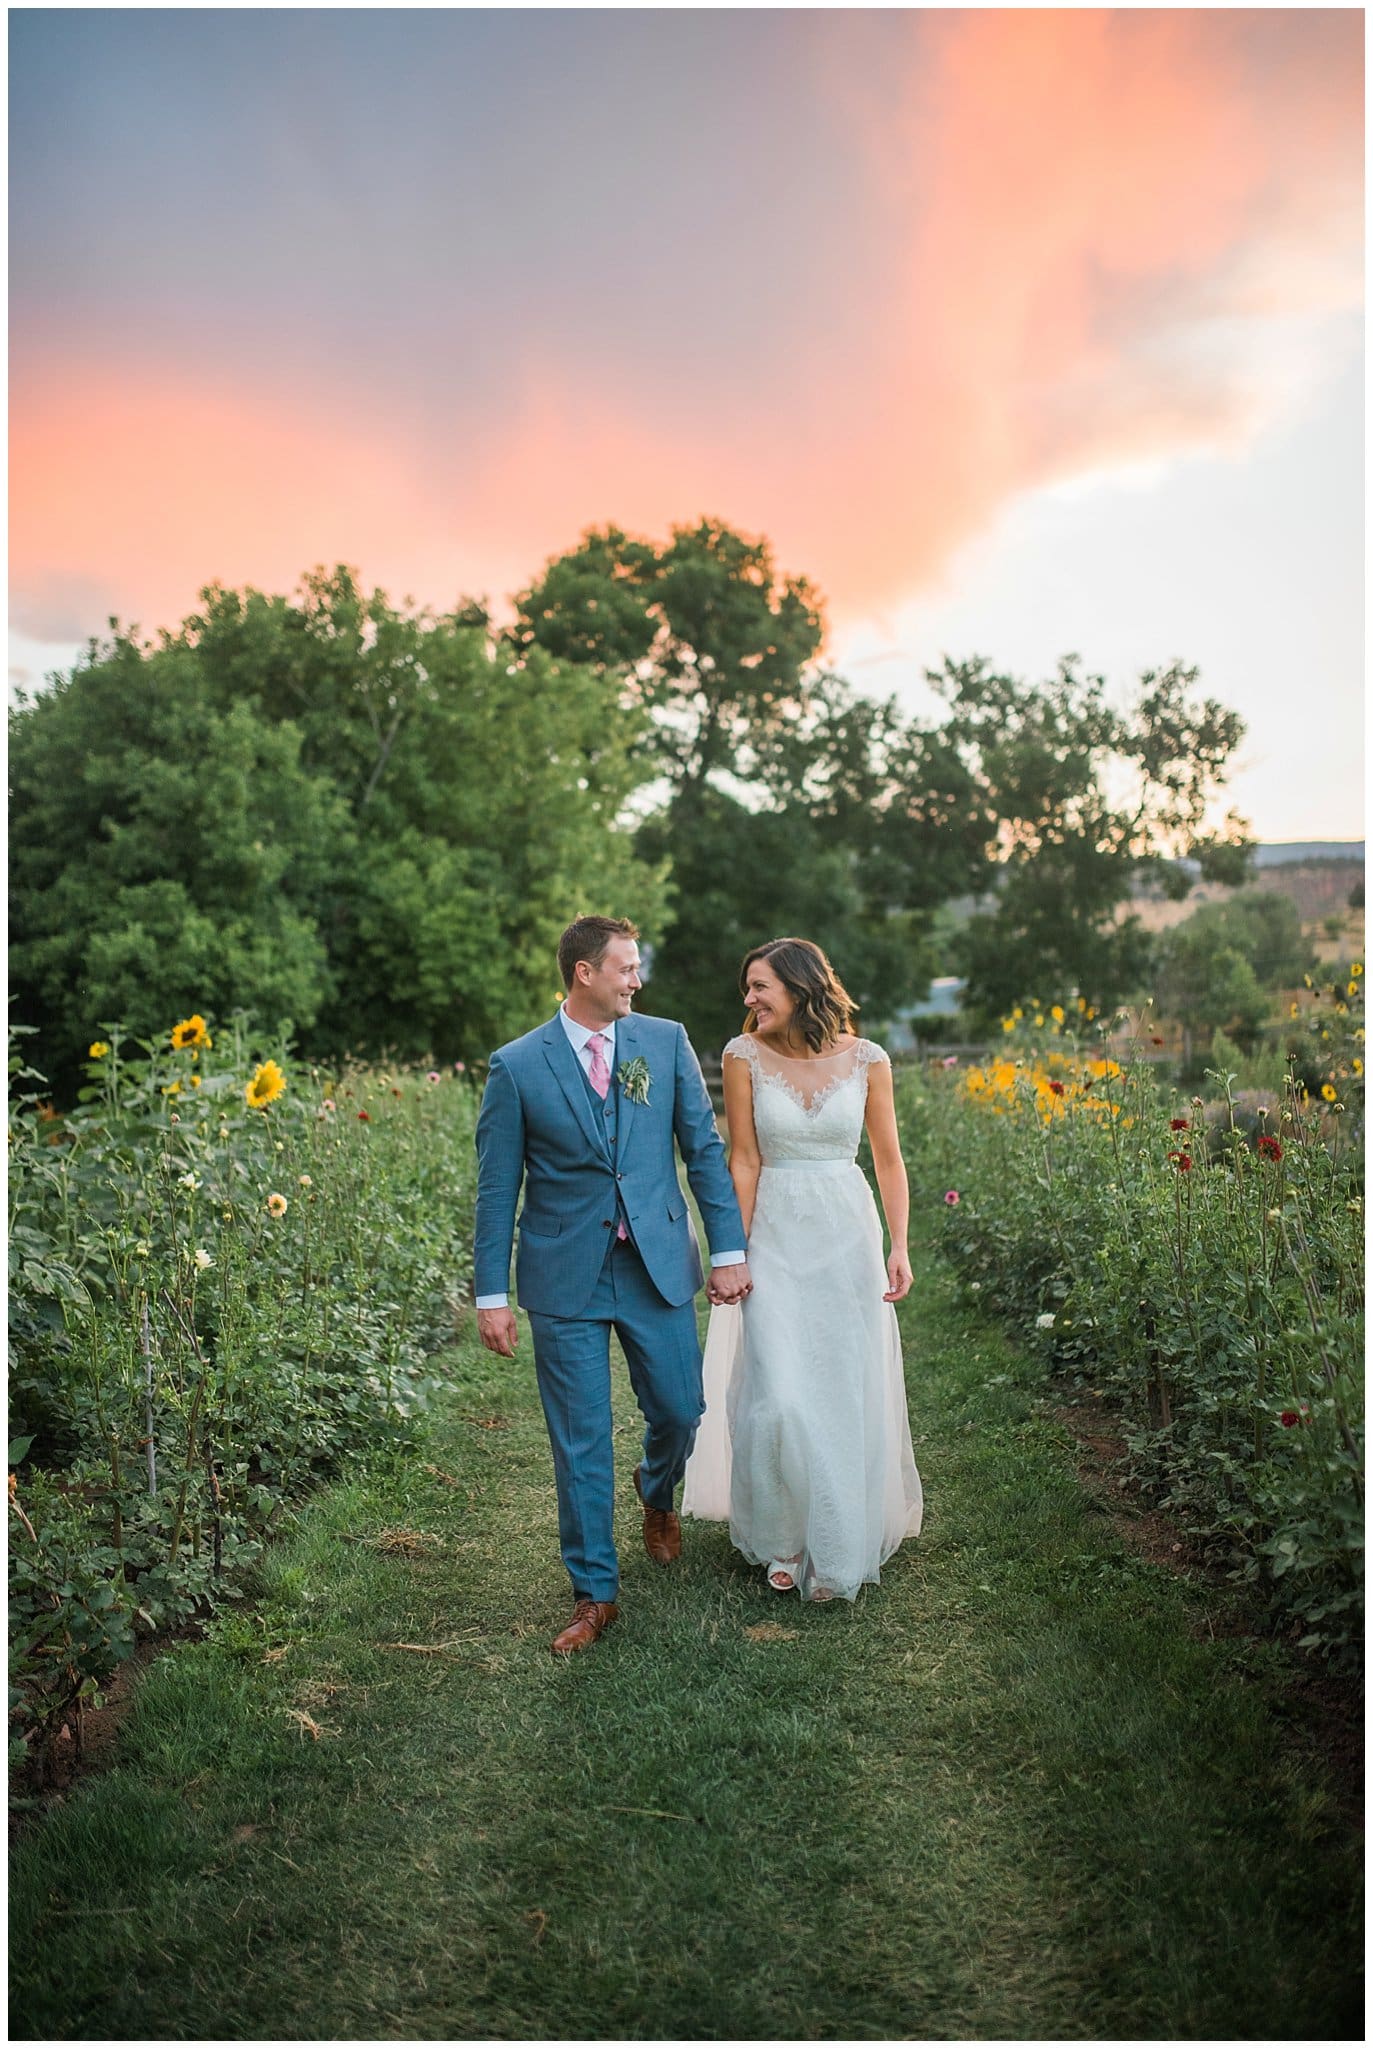 Bride and Groom walking in garden at sunset at Lyons Farmette wedding by Lyons Wedding Photographer Jennie Crate